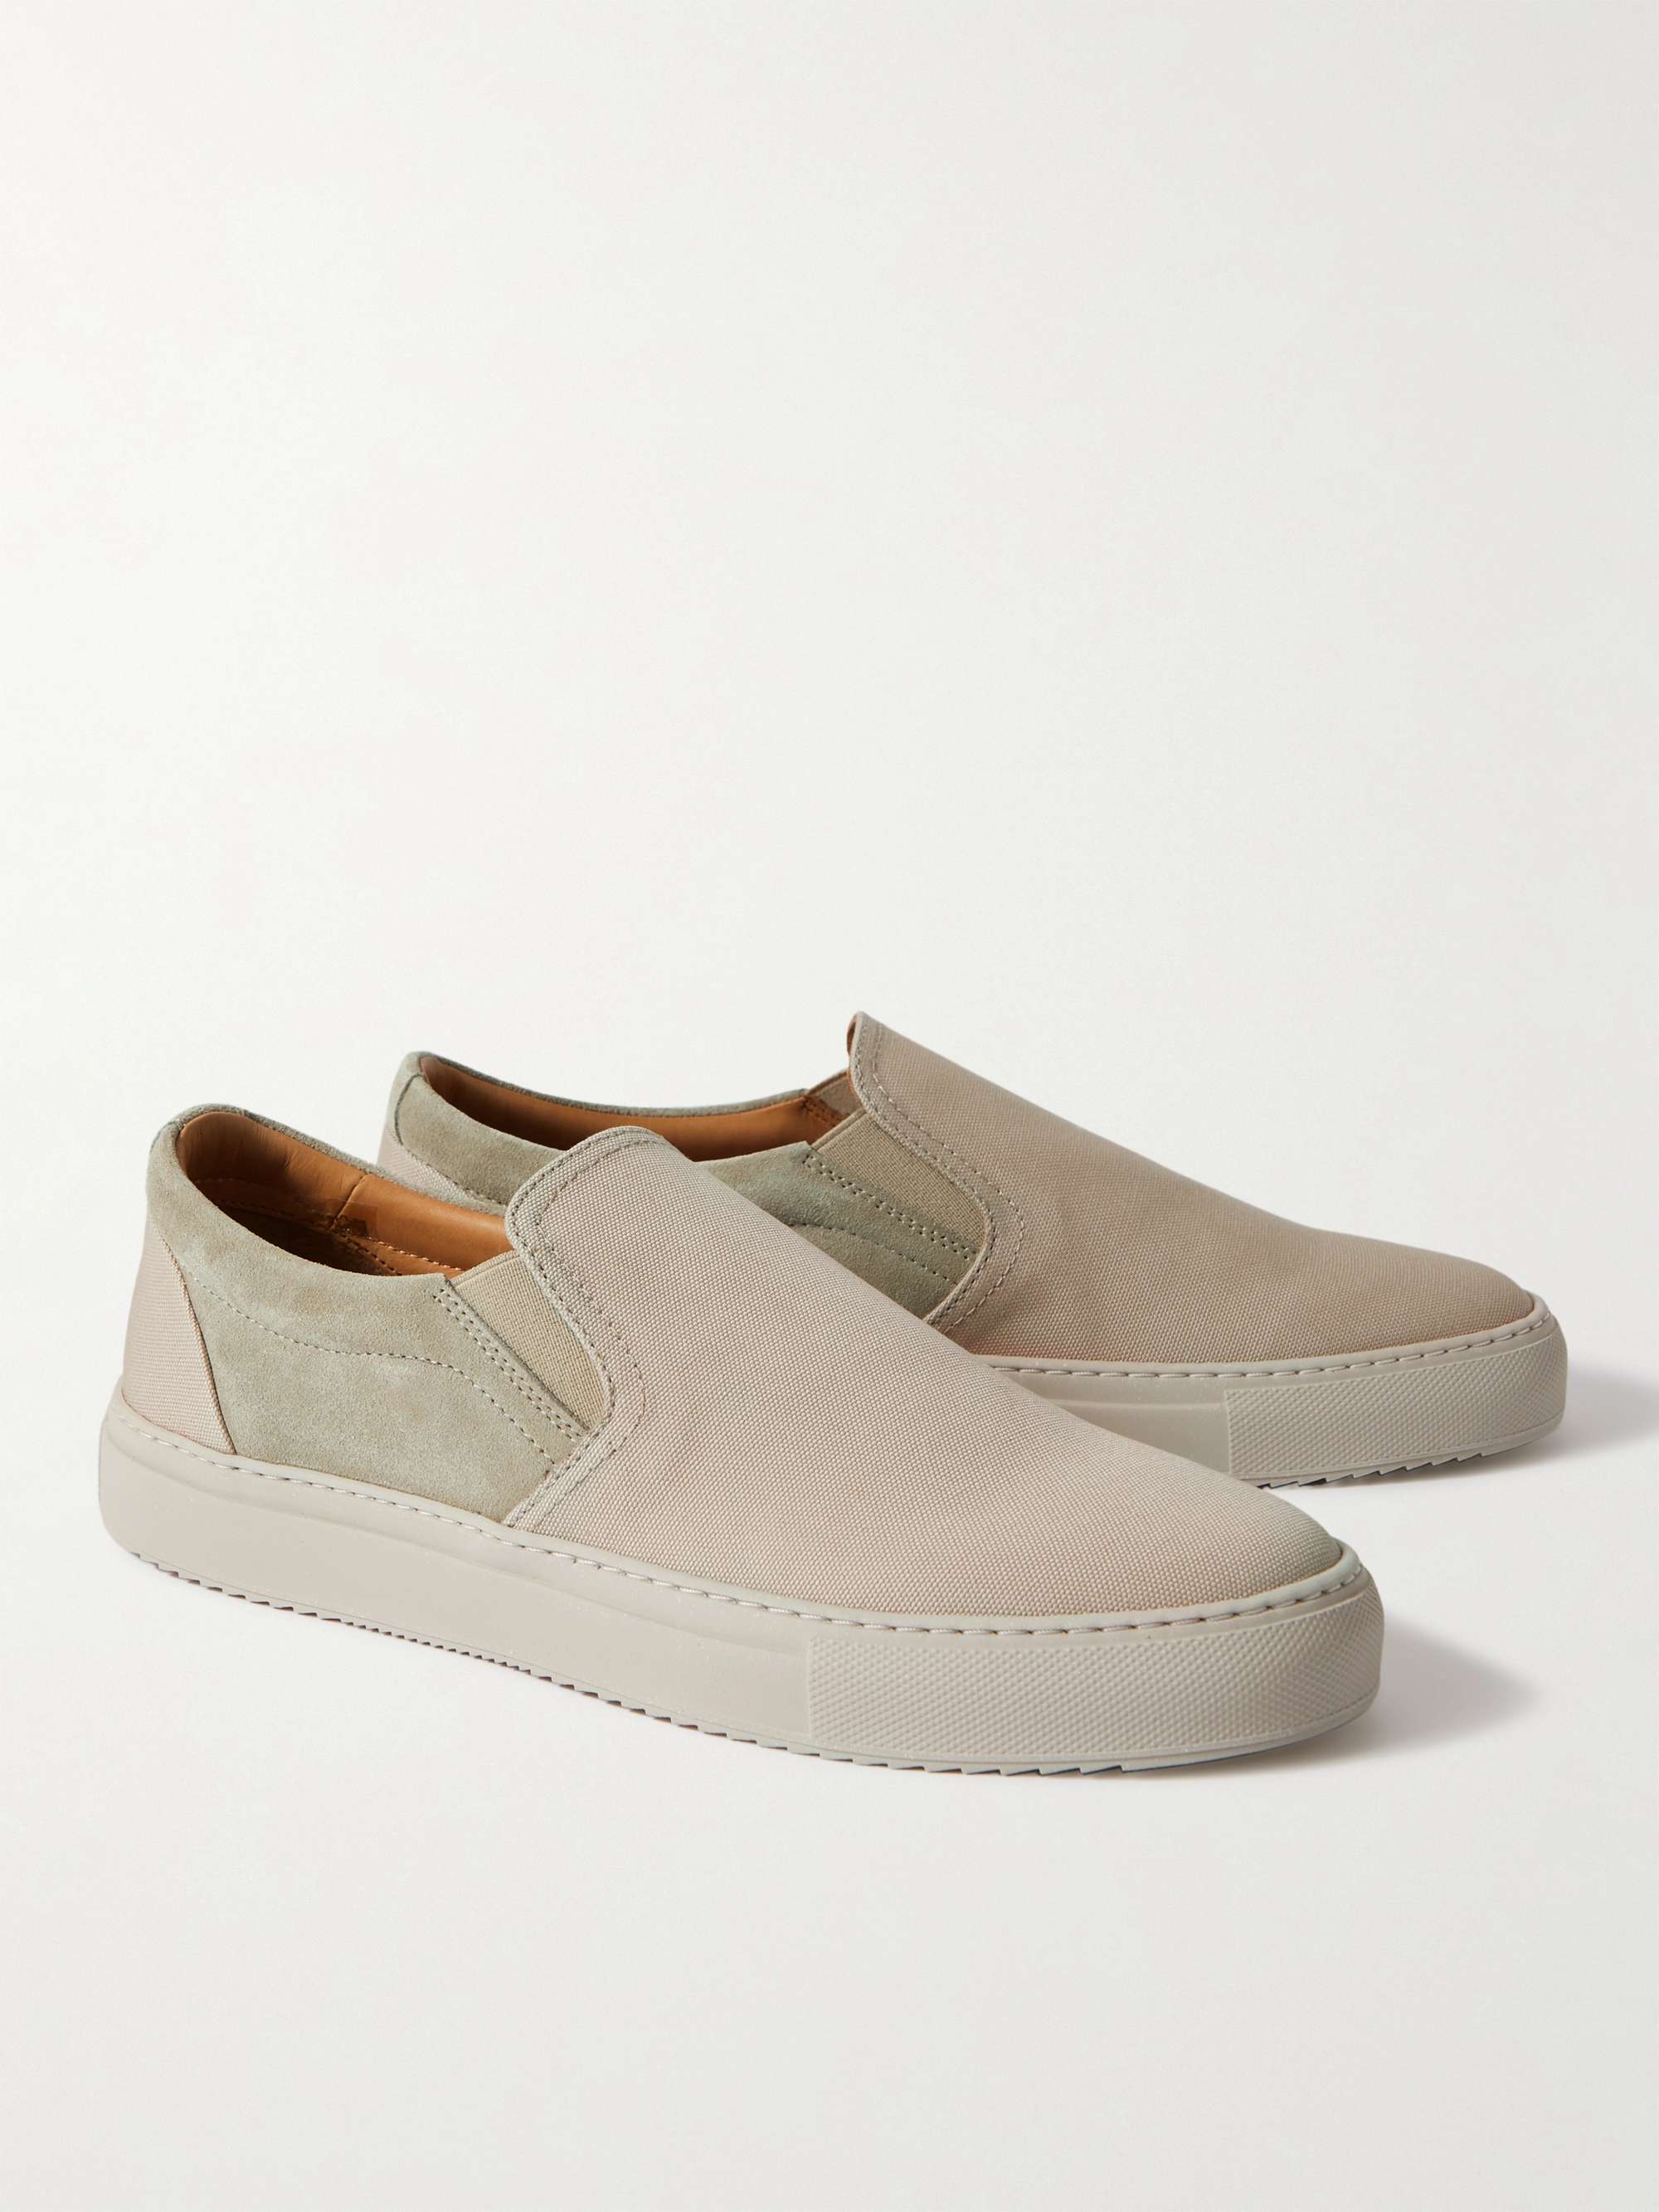 MR P. Larry Canvas and Suede Slip-On Sneakers